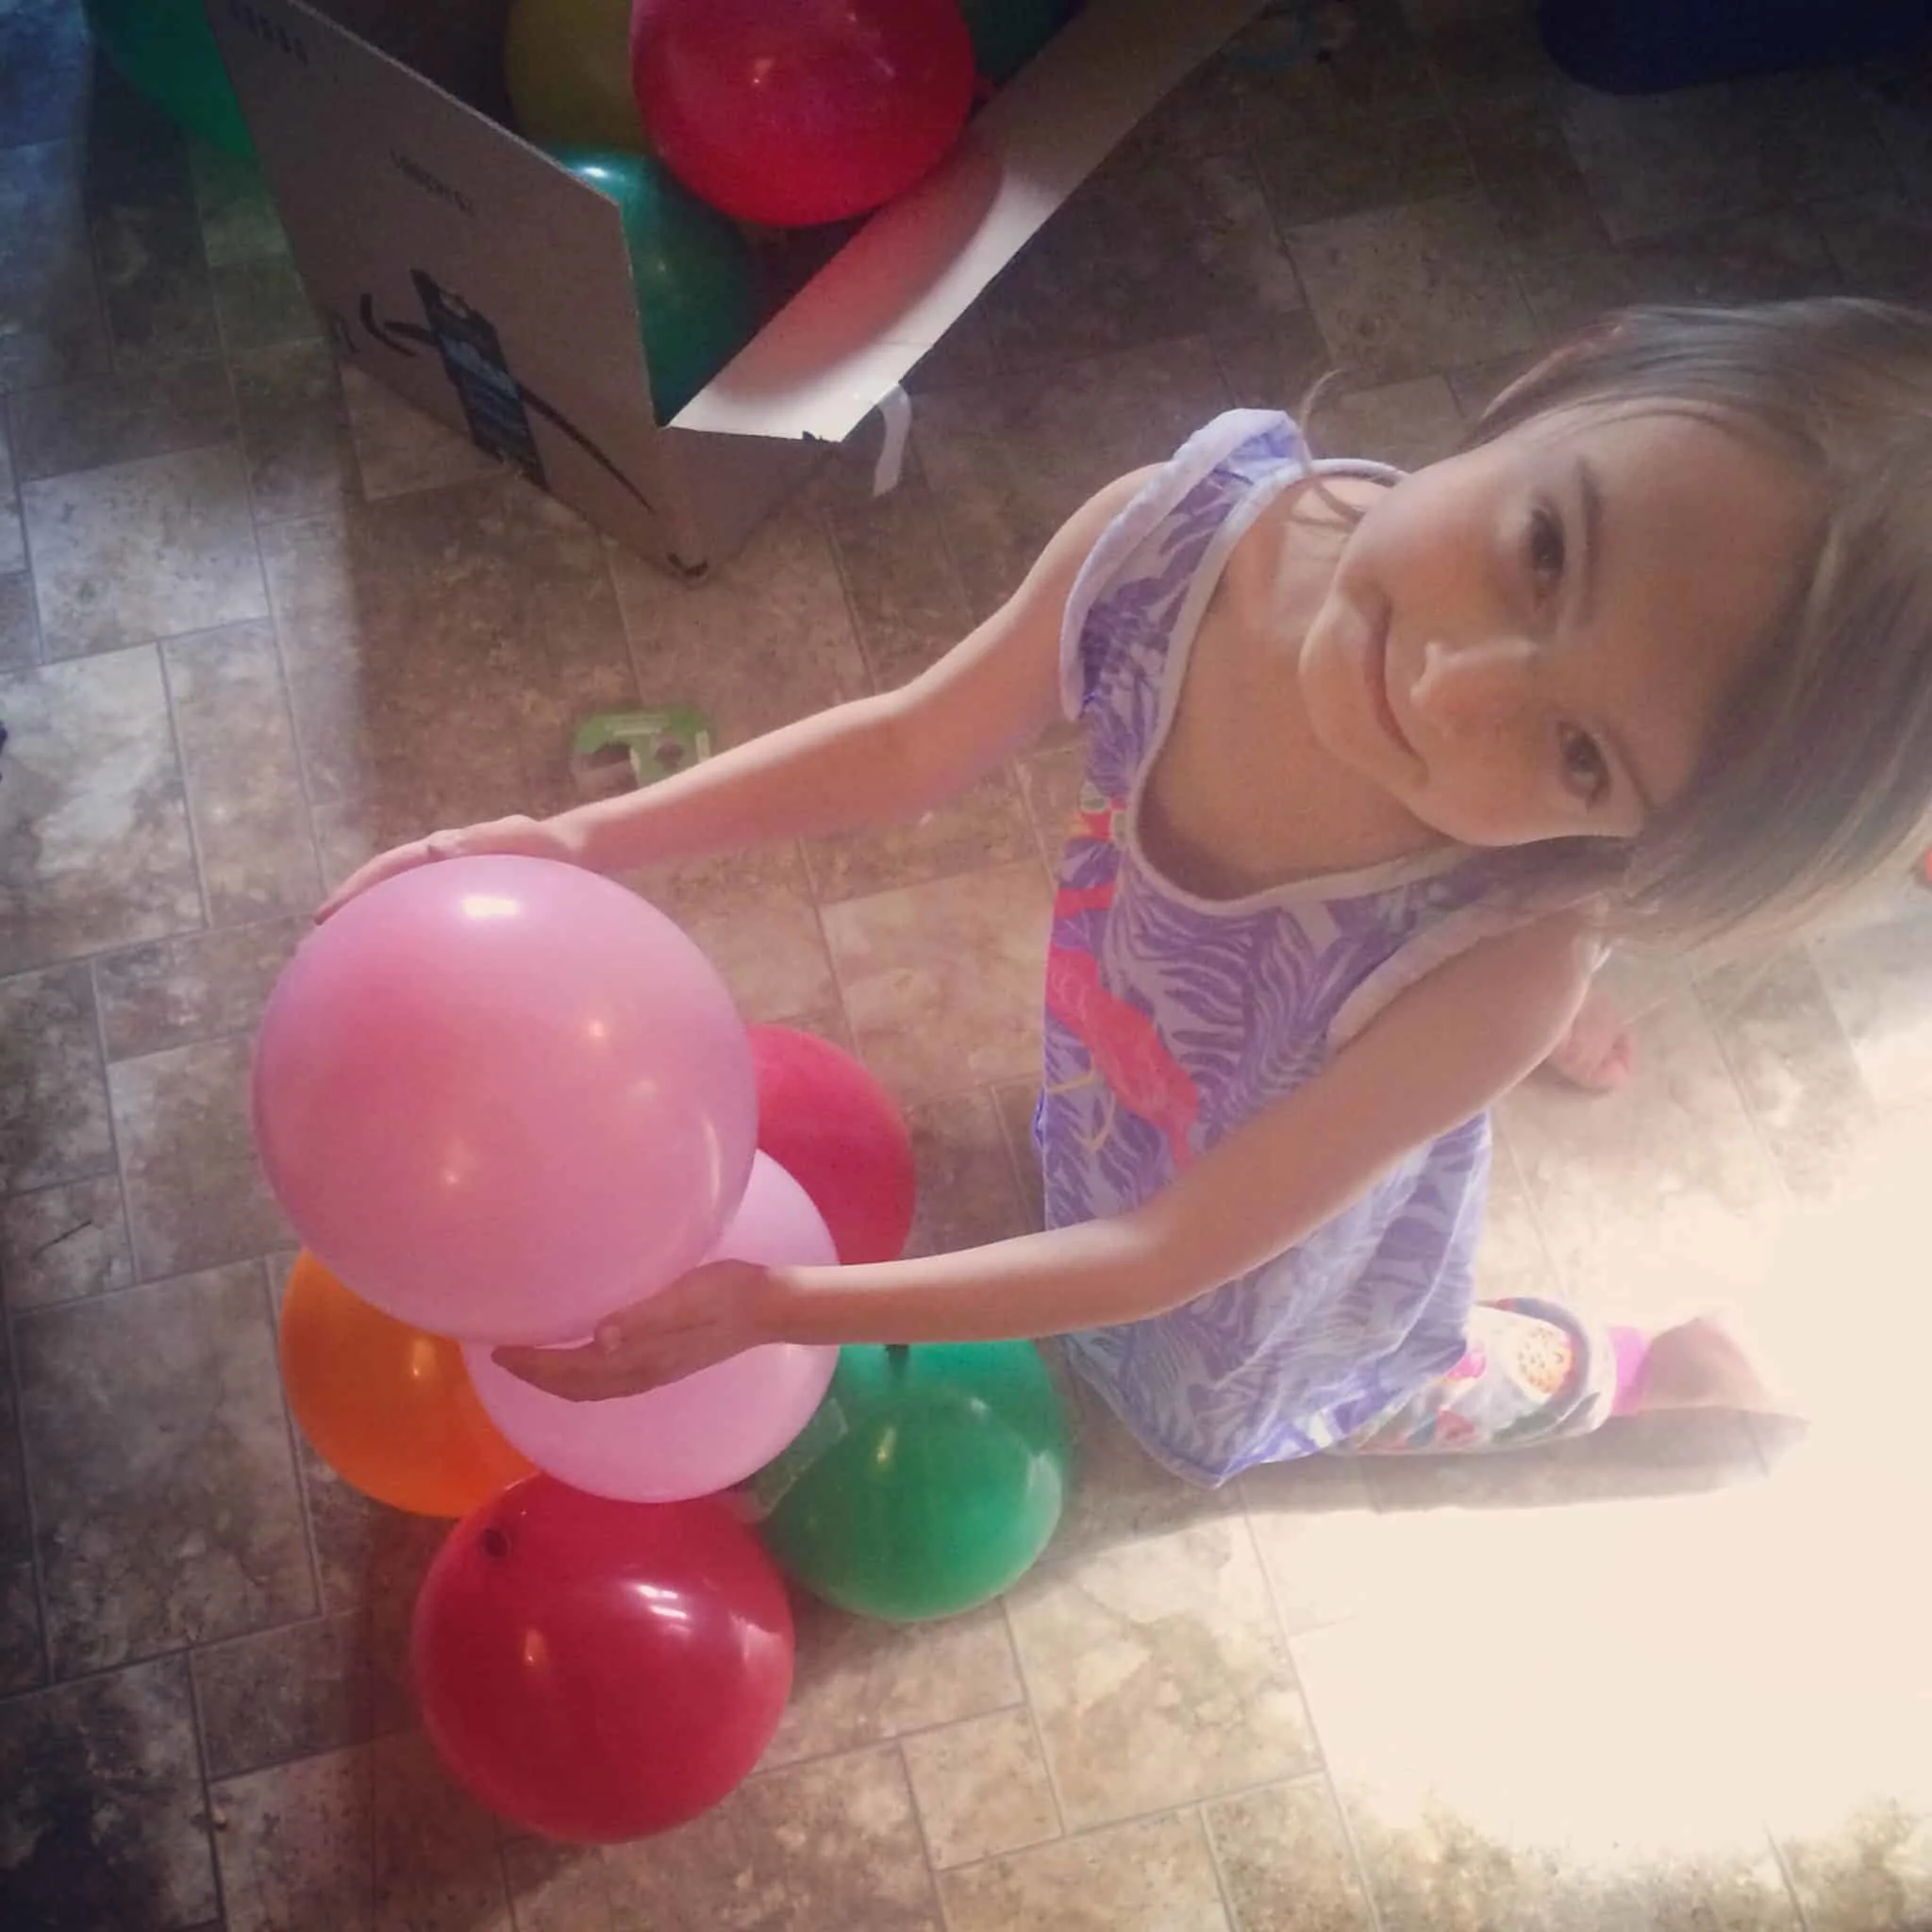 We love STEM Challenges and we totally love Moana! We put the two together and came up with some fun, brain bending STEM challenges that young kids will surely enjoy! Check out this awesome balloon tower challenge and grab your free printable Moana STEM challenge cards! #freebie #freeprintable #moana #disneymoana #STEMchallenges #MoanaSTEMchallenge #girlsinSTEM #kidcoders #easySTEMchallenges